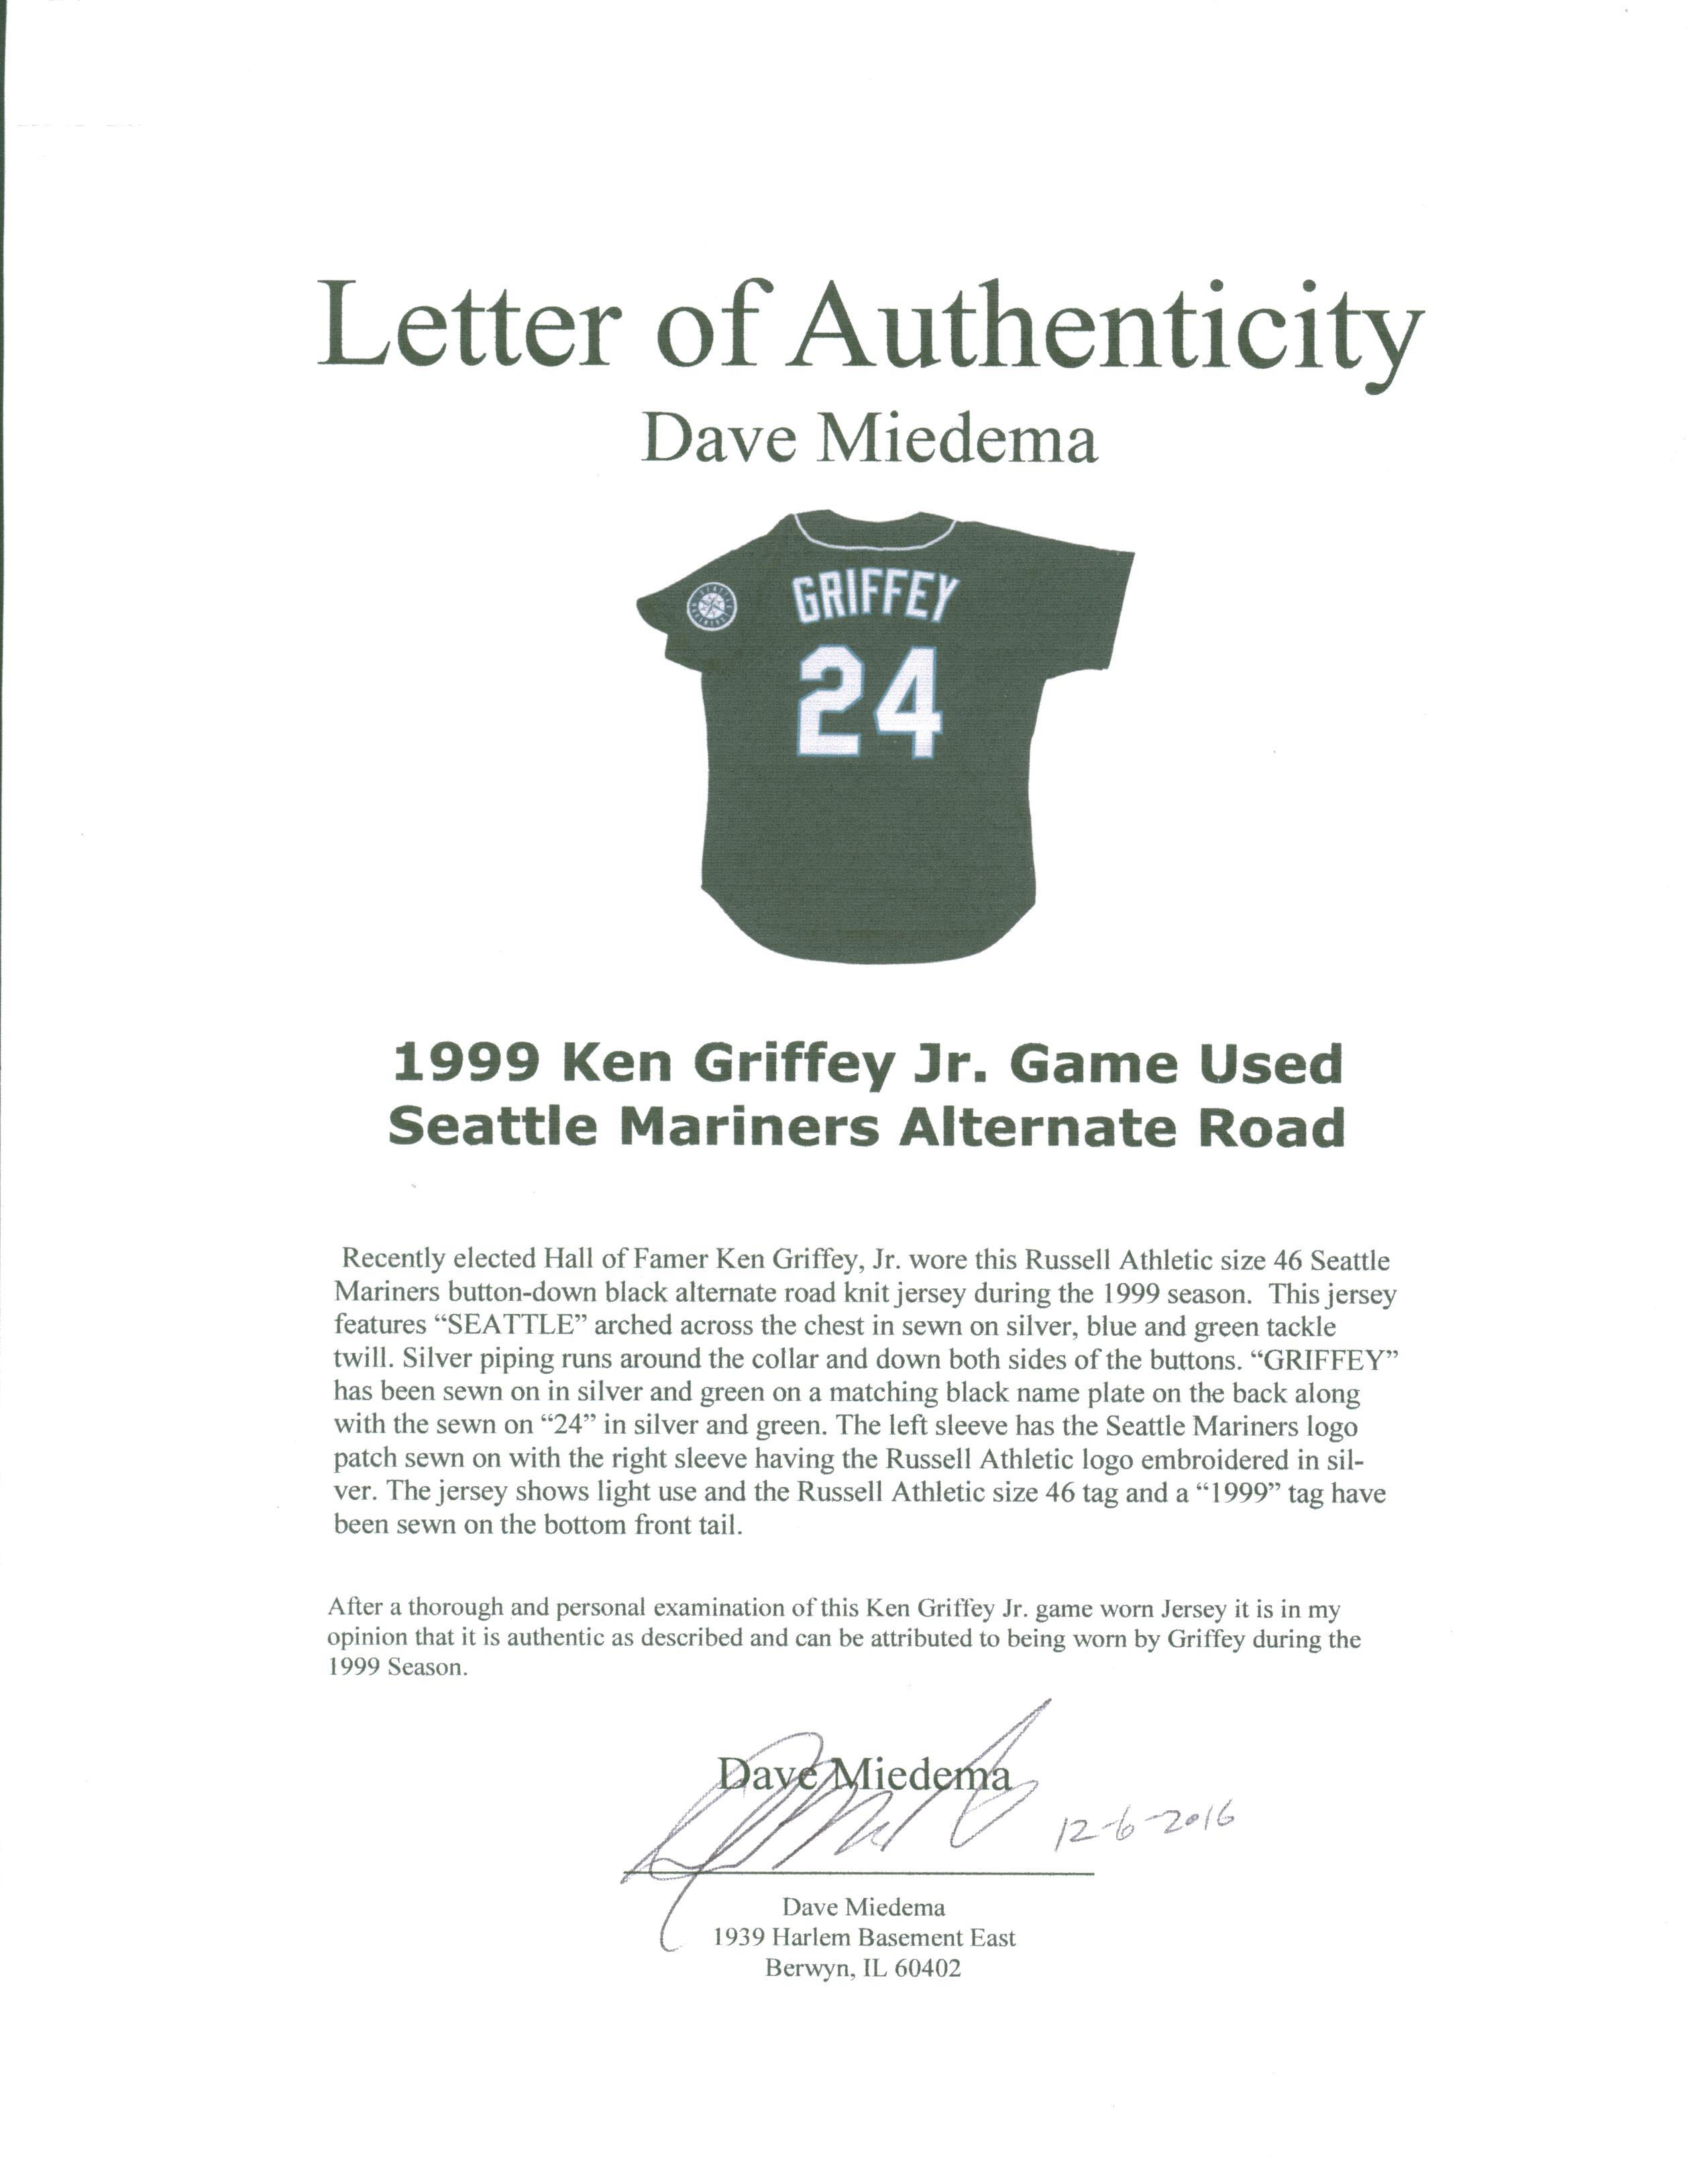 Lot - 2004 Ken Griffey Jr. Reds Game Jersey. Ex Mears Auctions.